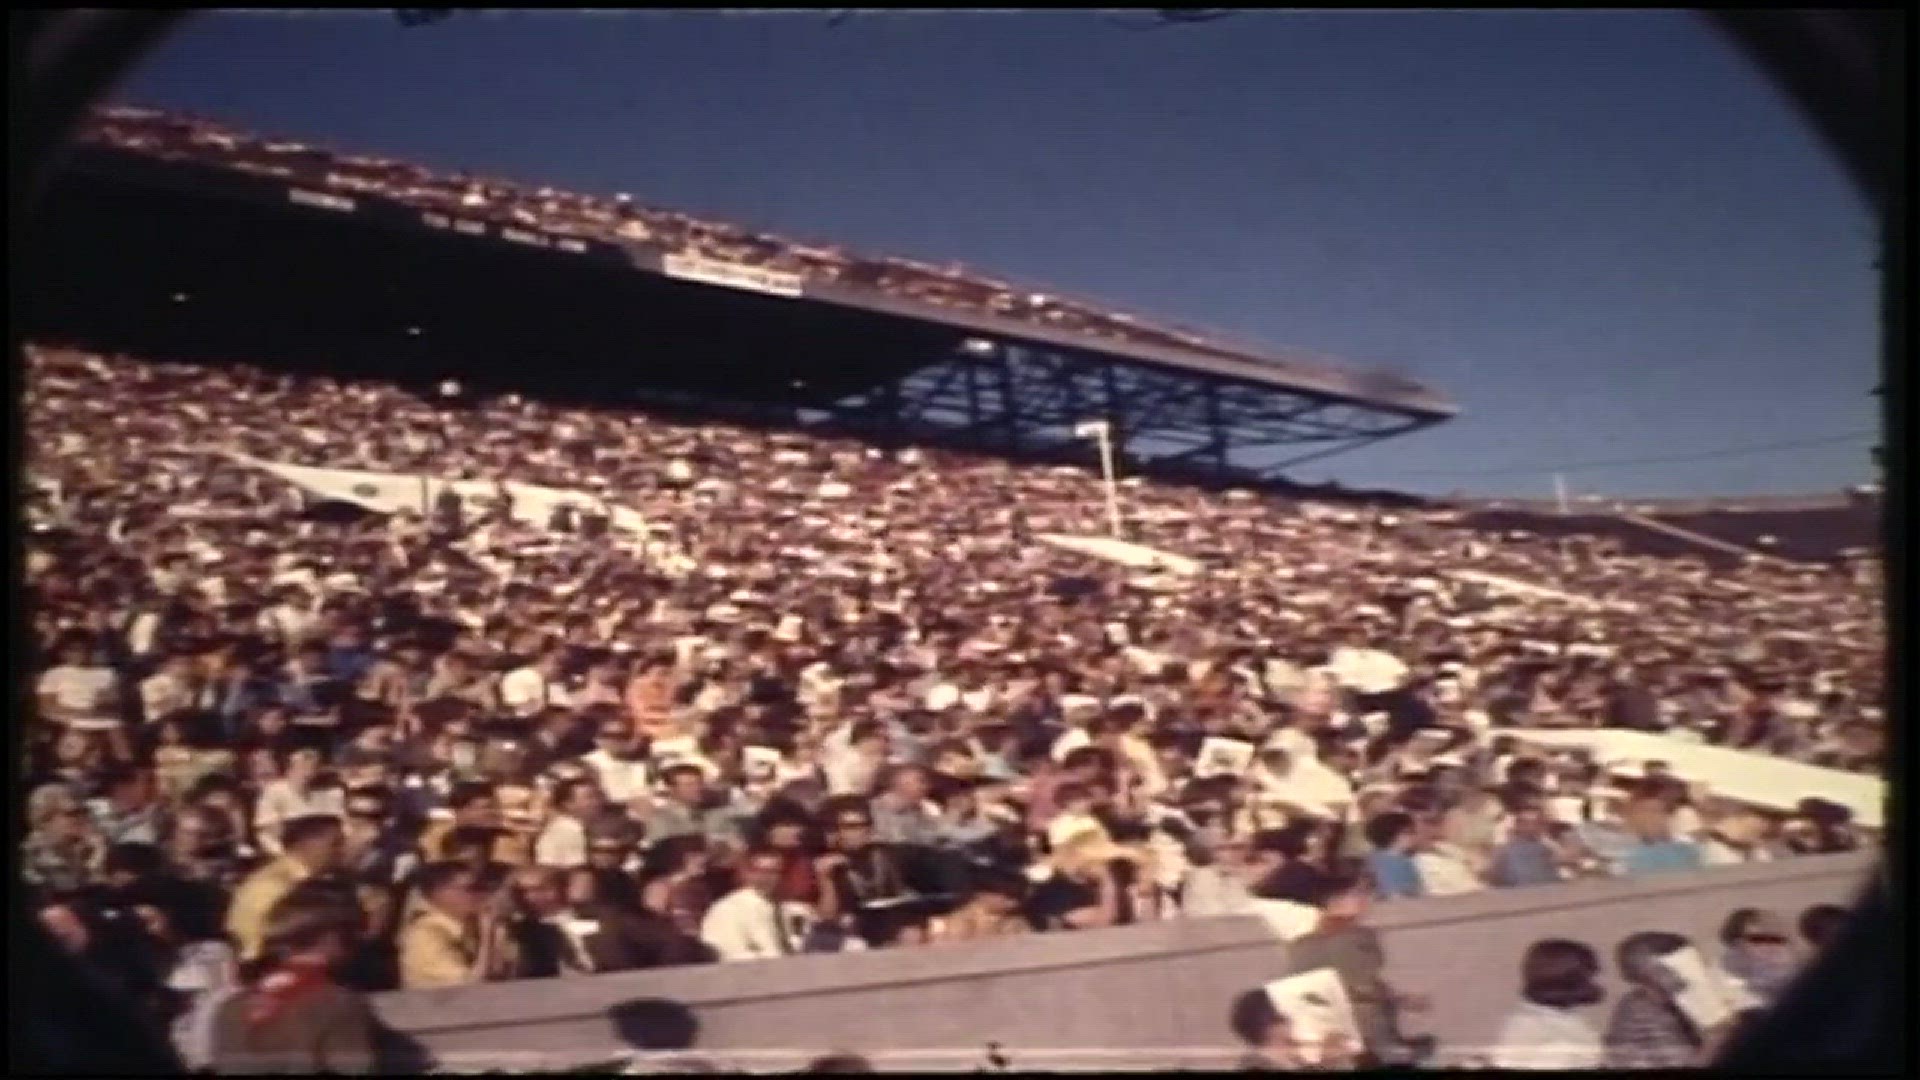 Video of the 1970 10-day crusade at Neyland Stadium in Knoxville. (No sound.)